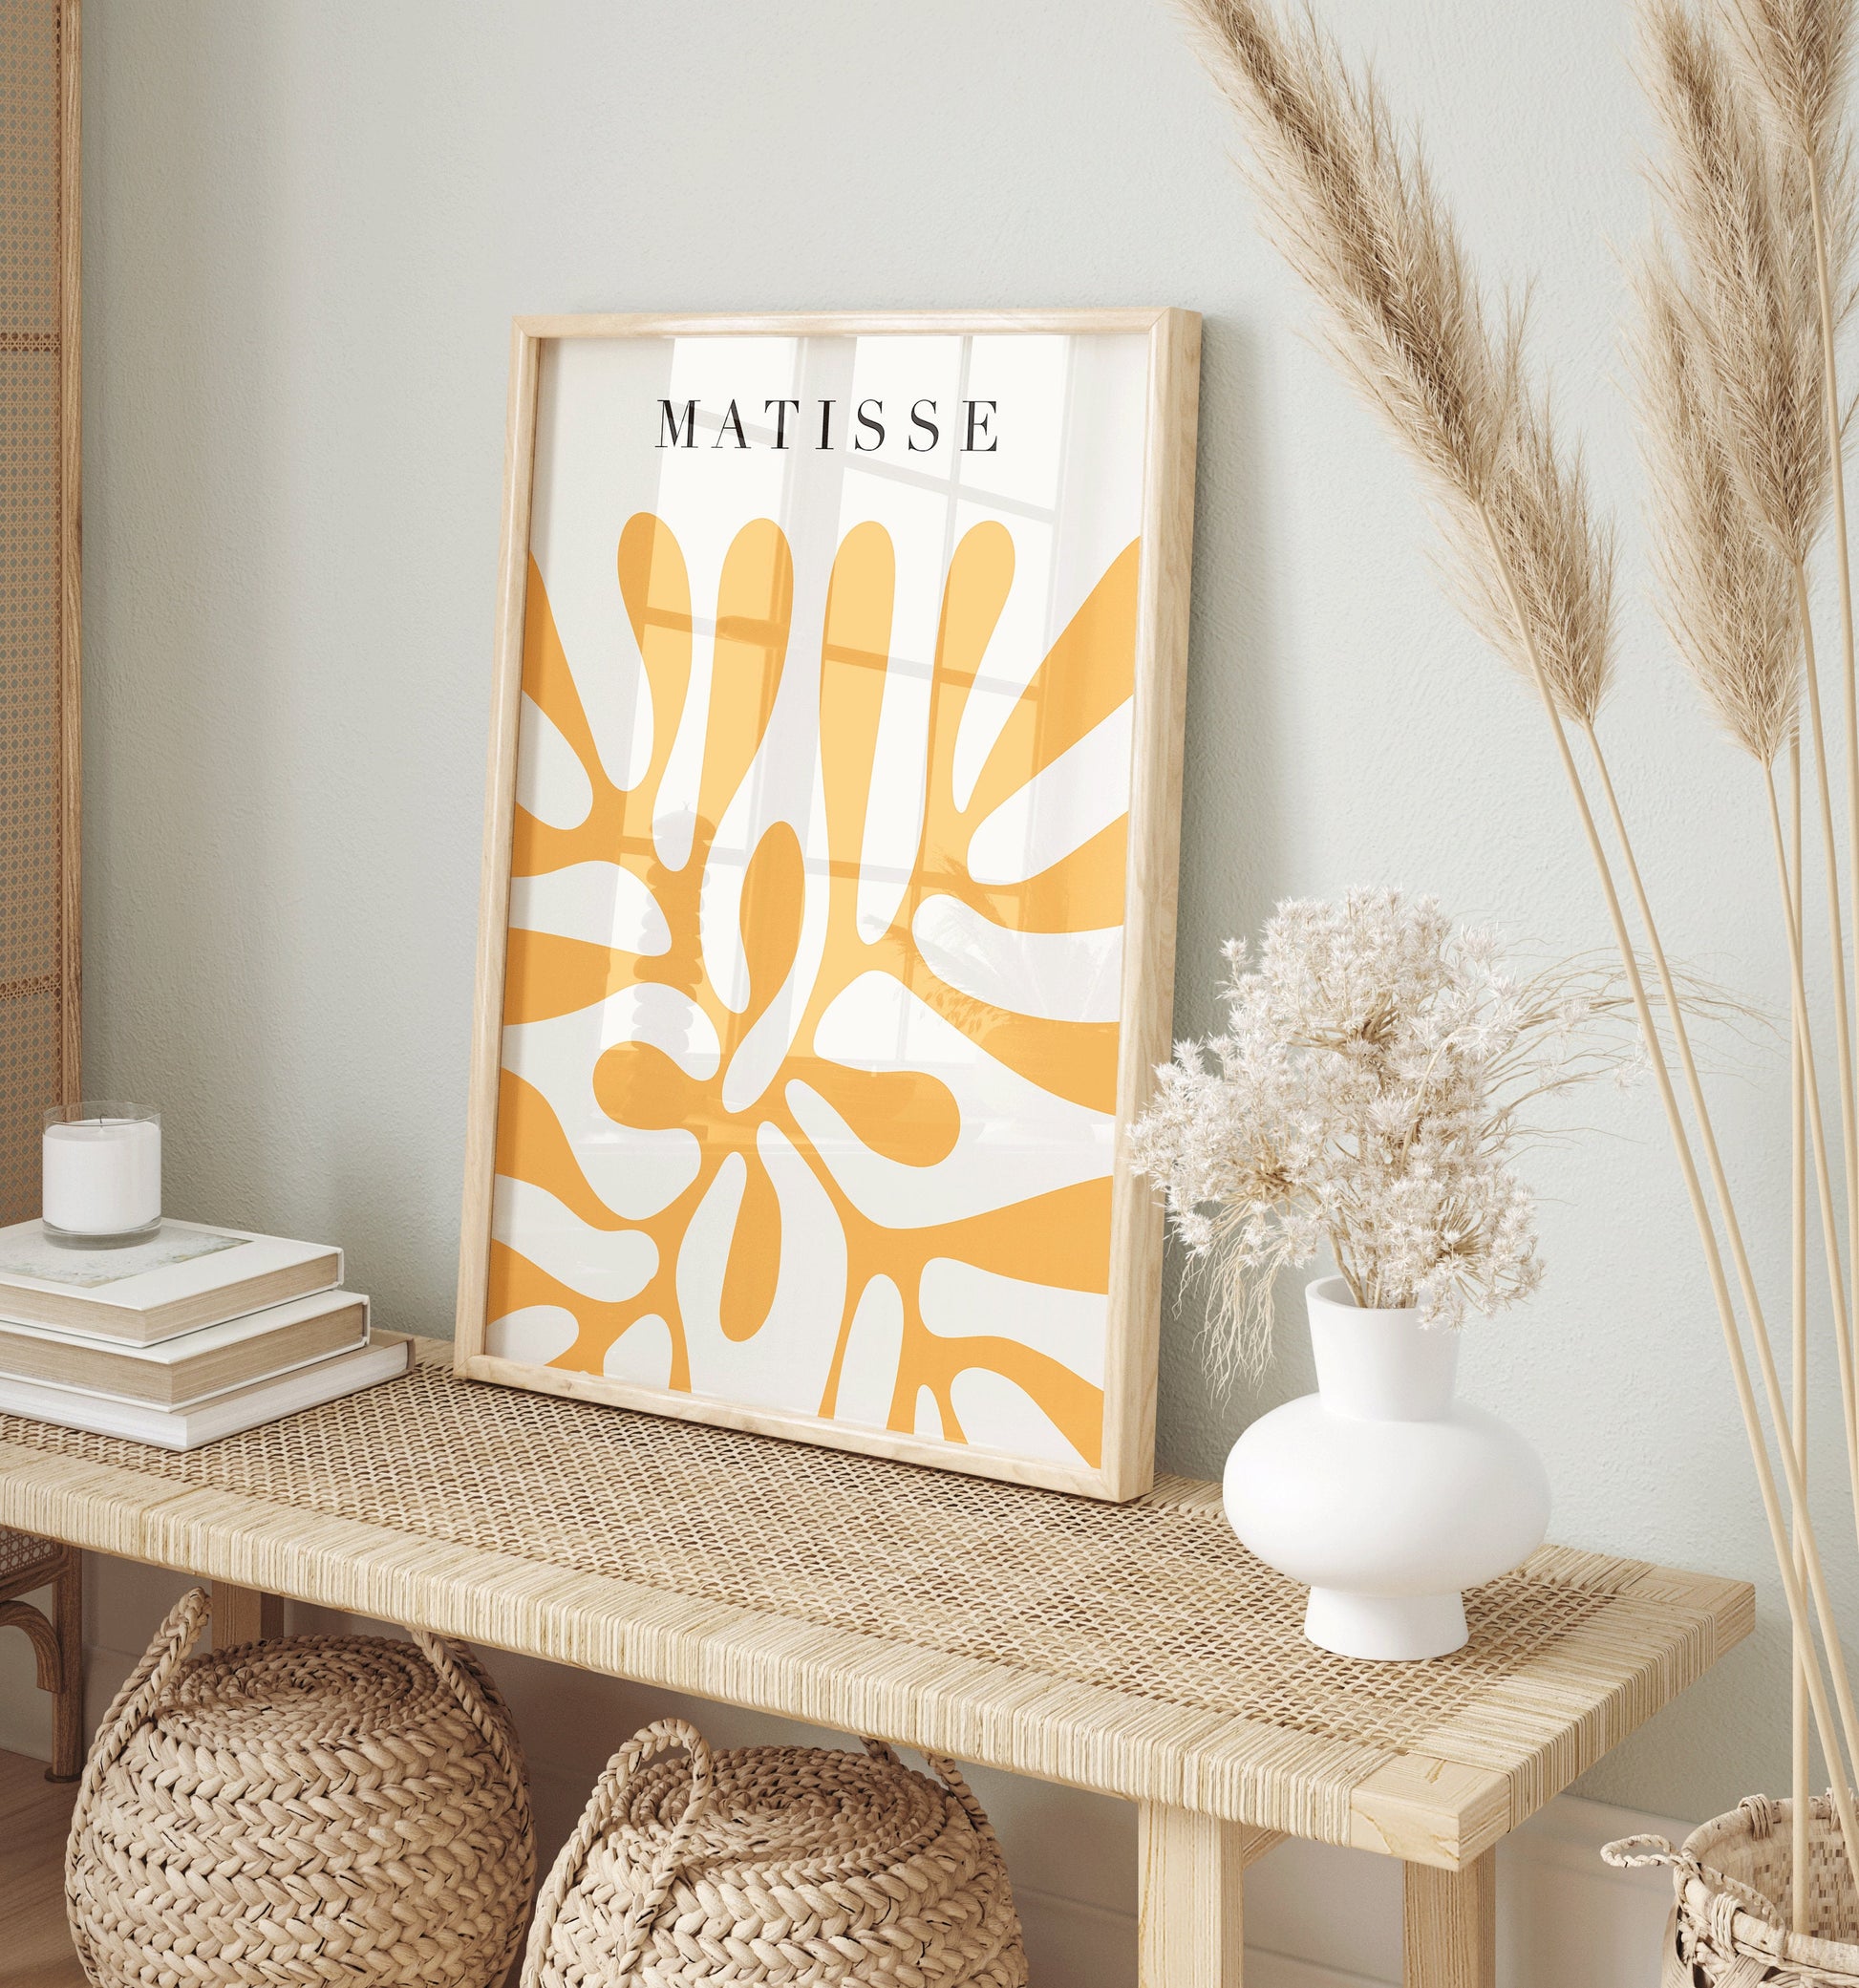 Framed Henri Matisse paper cutouts print Danish Pastel Exhibition Yellow Abstract Poster cutouts Home Office Museum Ready to hang Decor Gift